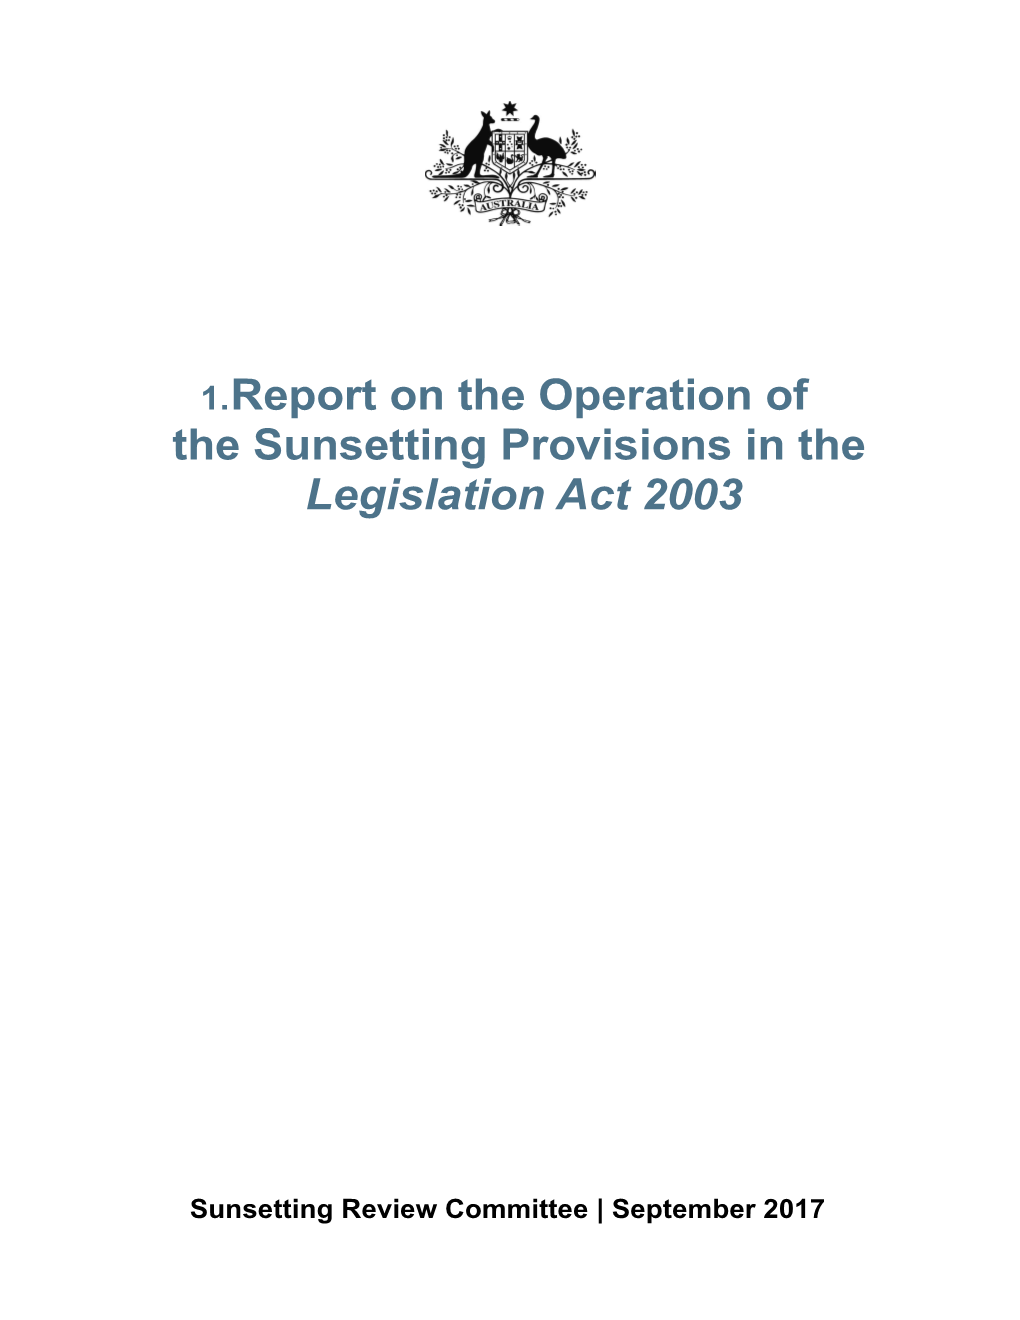 Report on the Operation of the Sunsetting Provisions in the Legislation Act 2003